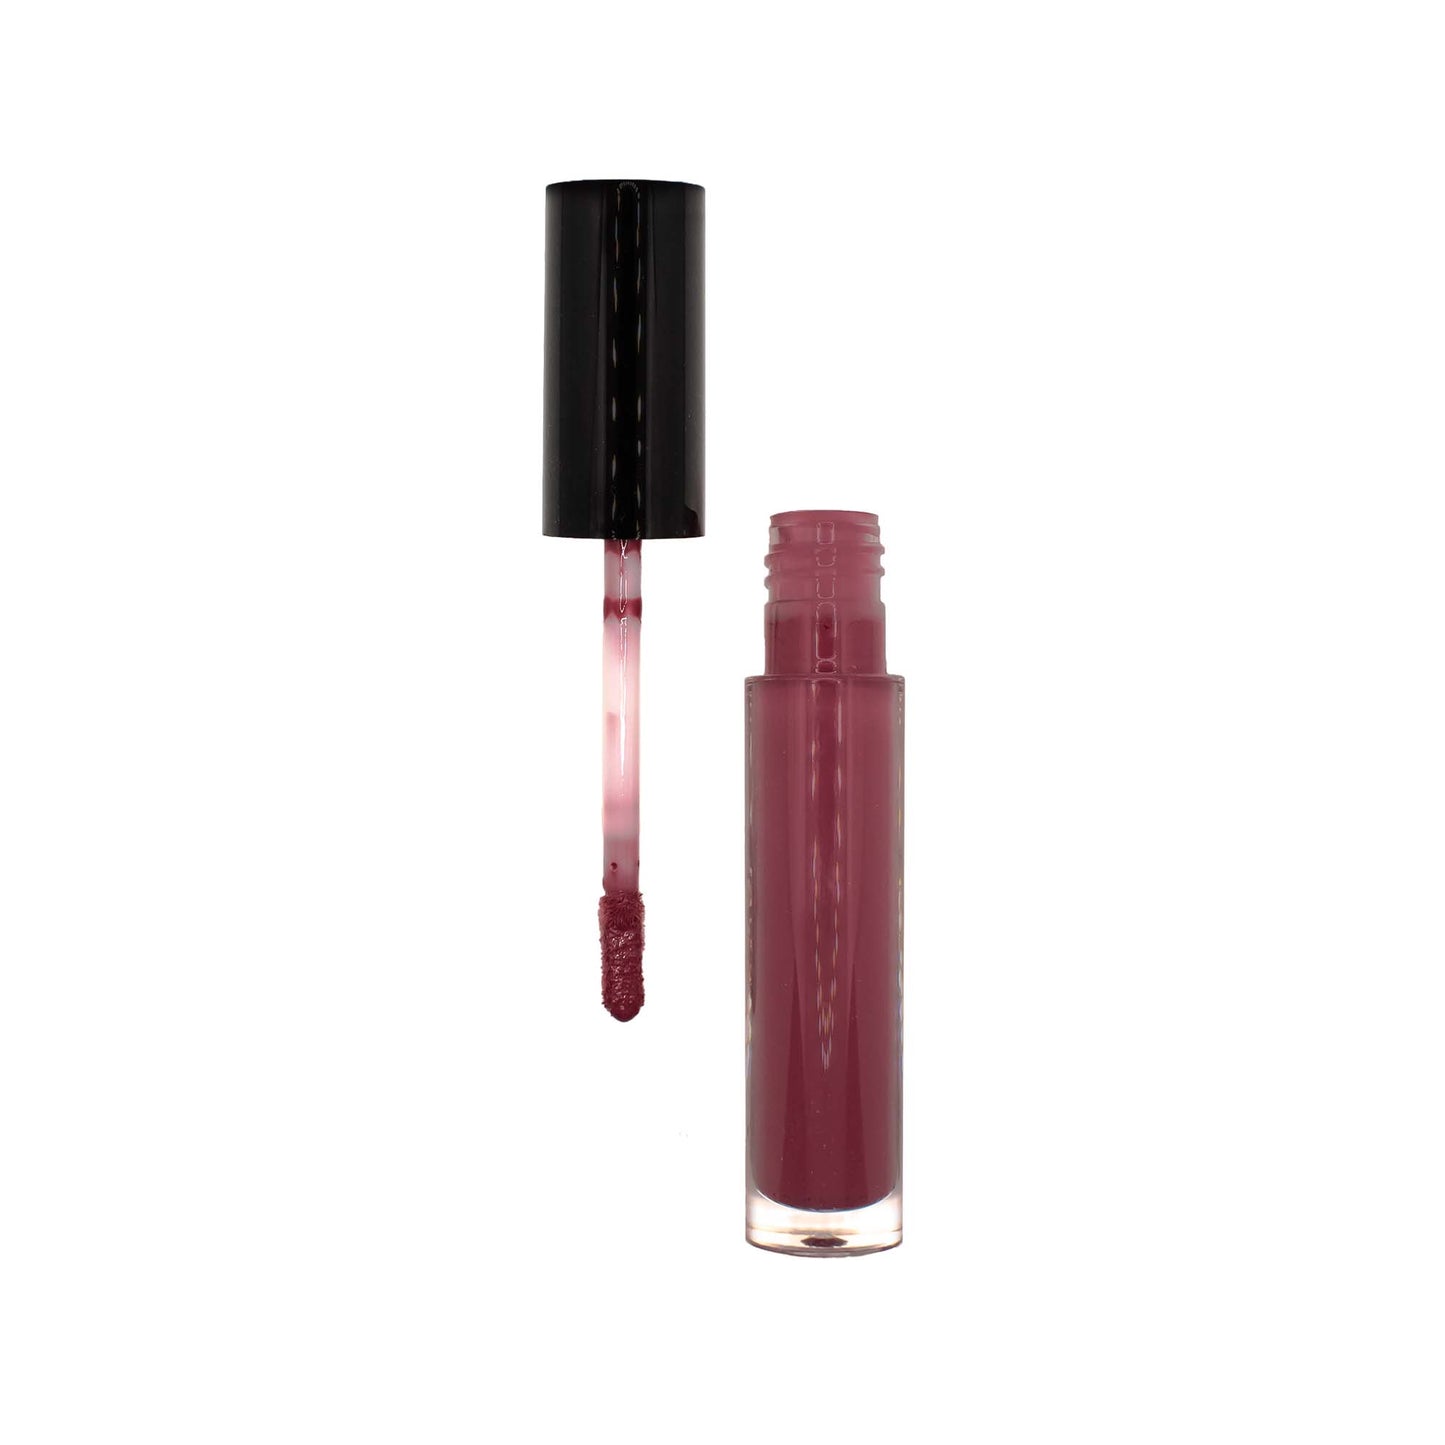 Cruisin Organics Crimson Lip Gloss. With just one swipe, add a long-lasting shine to your lips. Choose from a variety of shimmer and natural finish options to effortlessly enhance your look. This sheer tint adds the perfect amount of shine and pigments for a sophisticated finish. Elevate your style with Crimson Lip Gloss.